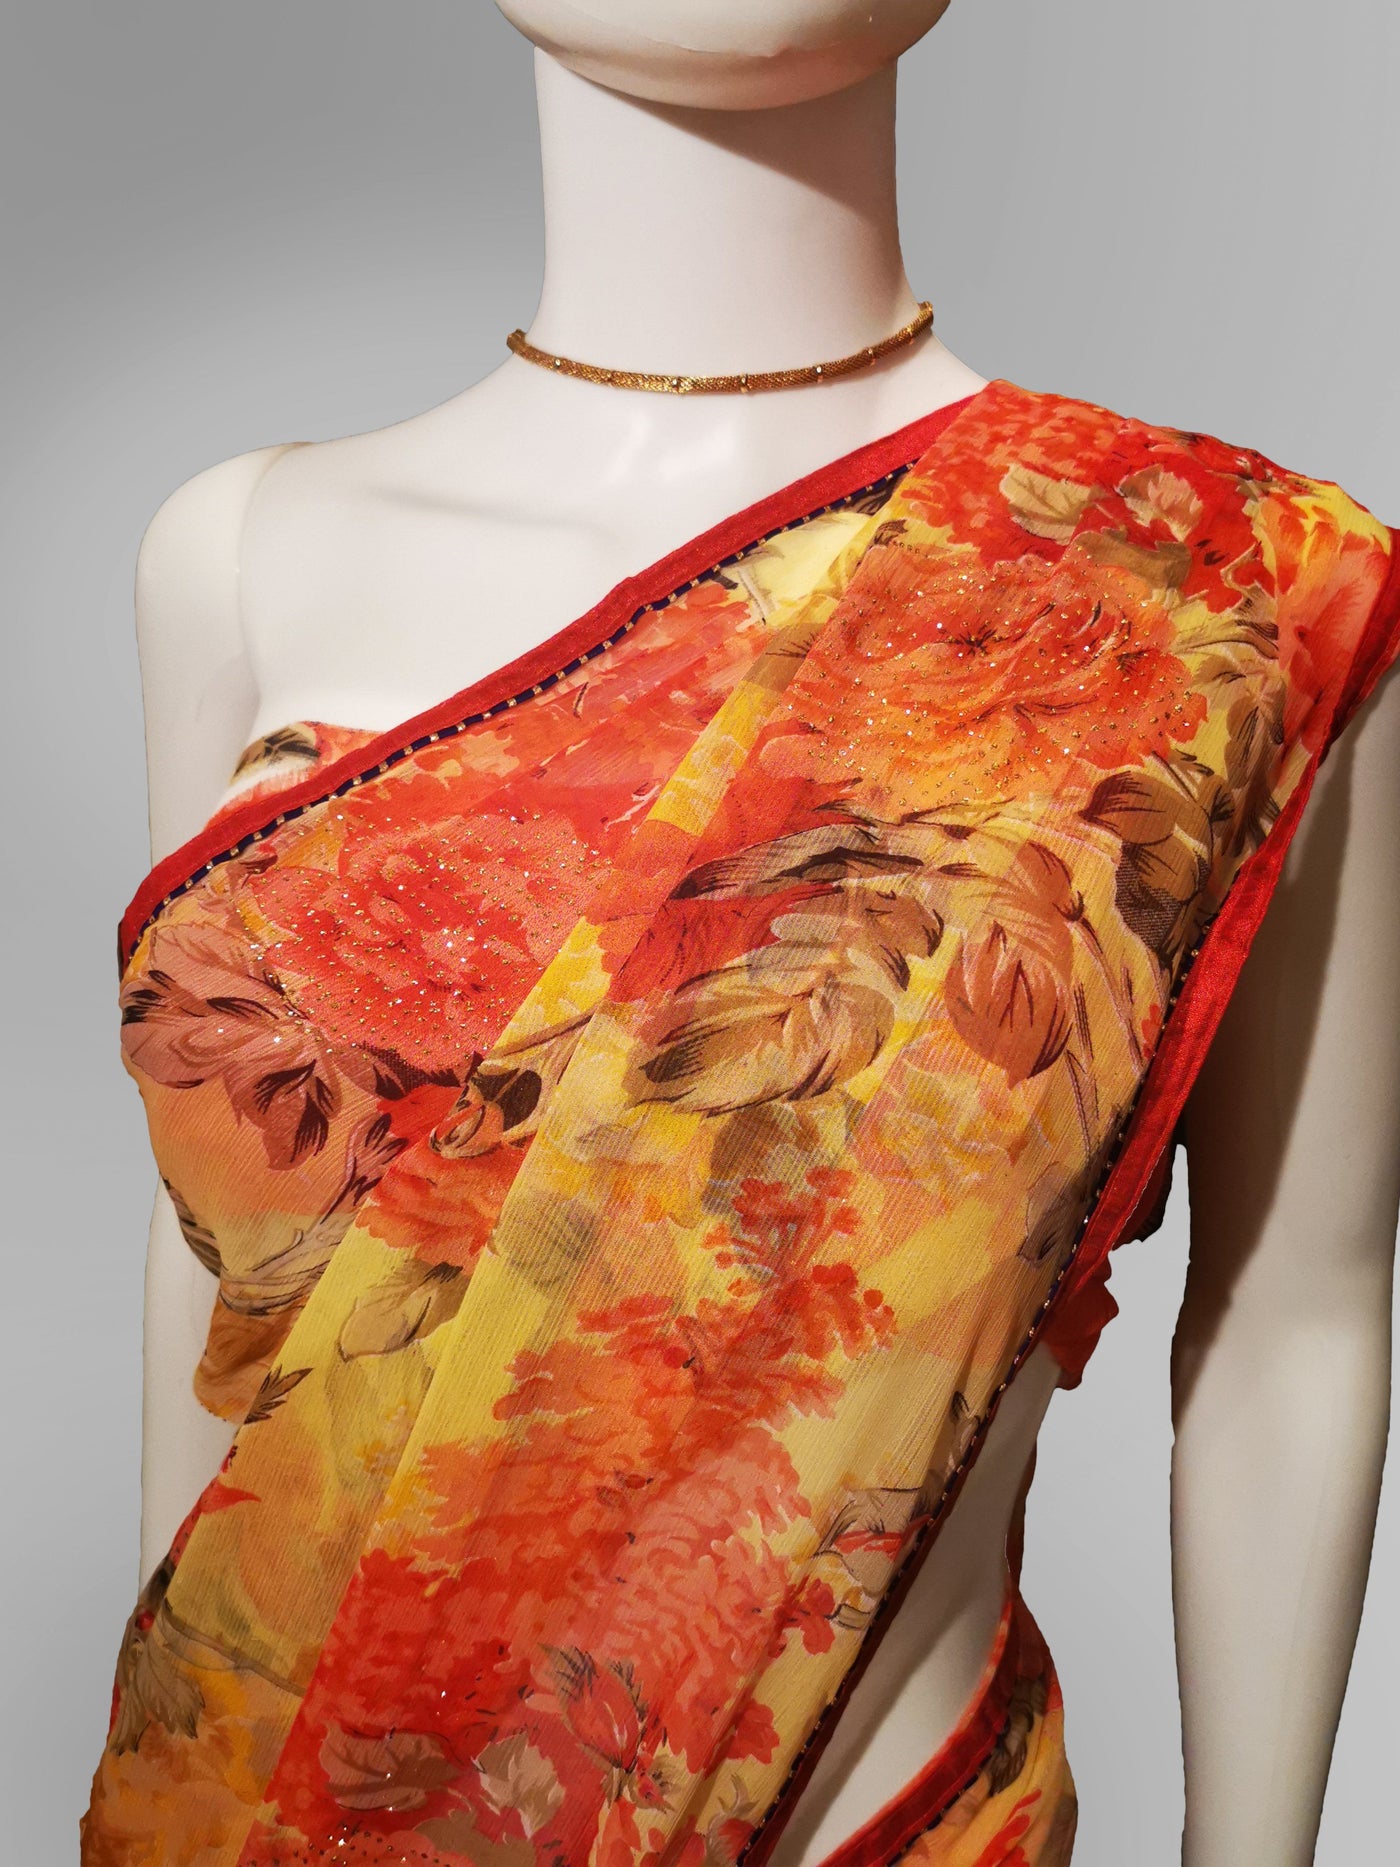 Saree in Orange Yellow Pastel Floral Design with Sequin Work Indian Clothing in Denver, CO, Aurora, CO, Boulder, CO, Fort Collins, CO, Colorado Springs, CO, Parker, CO, Highlands Ranch, CO, Cherry Creek, CO, Centennial, CO, and Longmont, CO. NATIONWIDE SHIPPING USA- India Fashion X